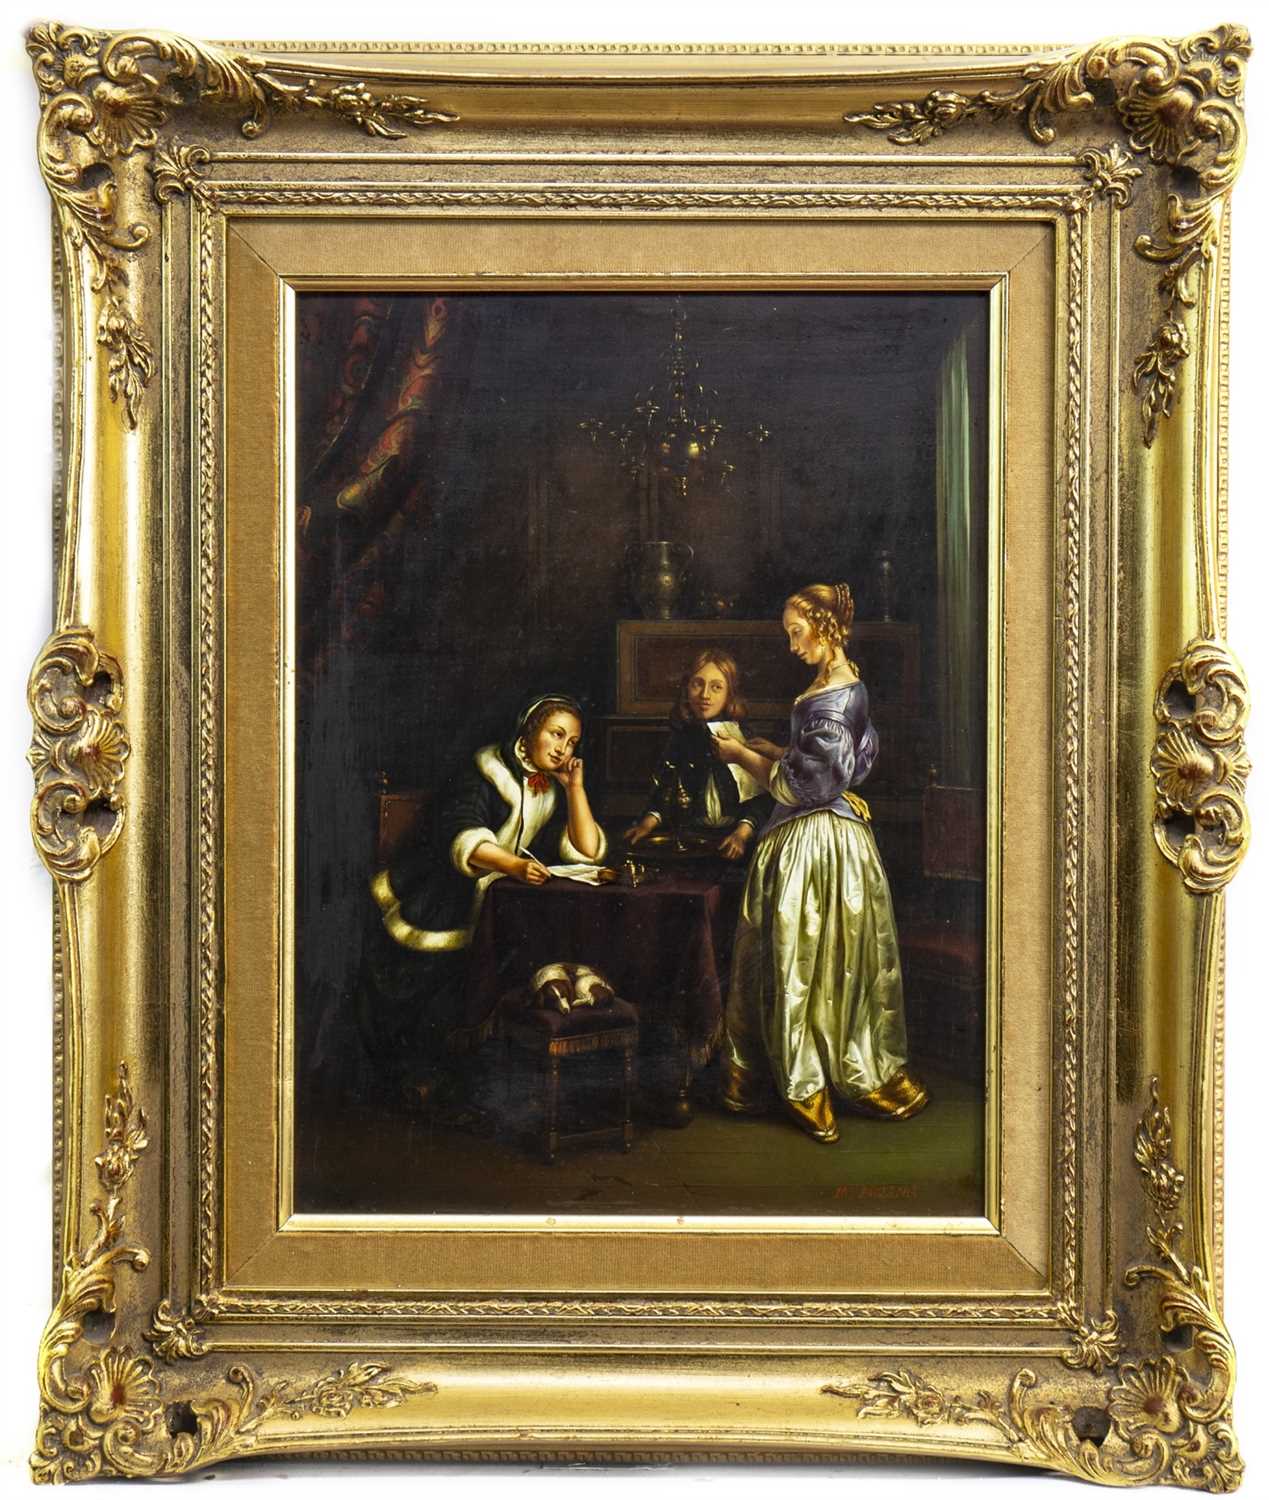 Lot 494 - CRAFTING A TALE, AN OIL BY JACOB MEMBLING